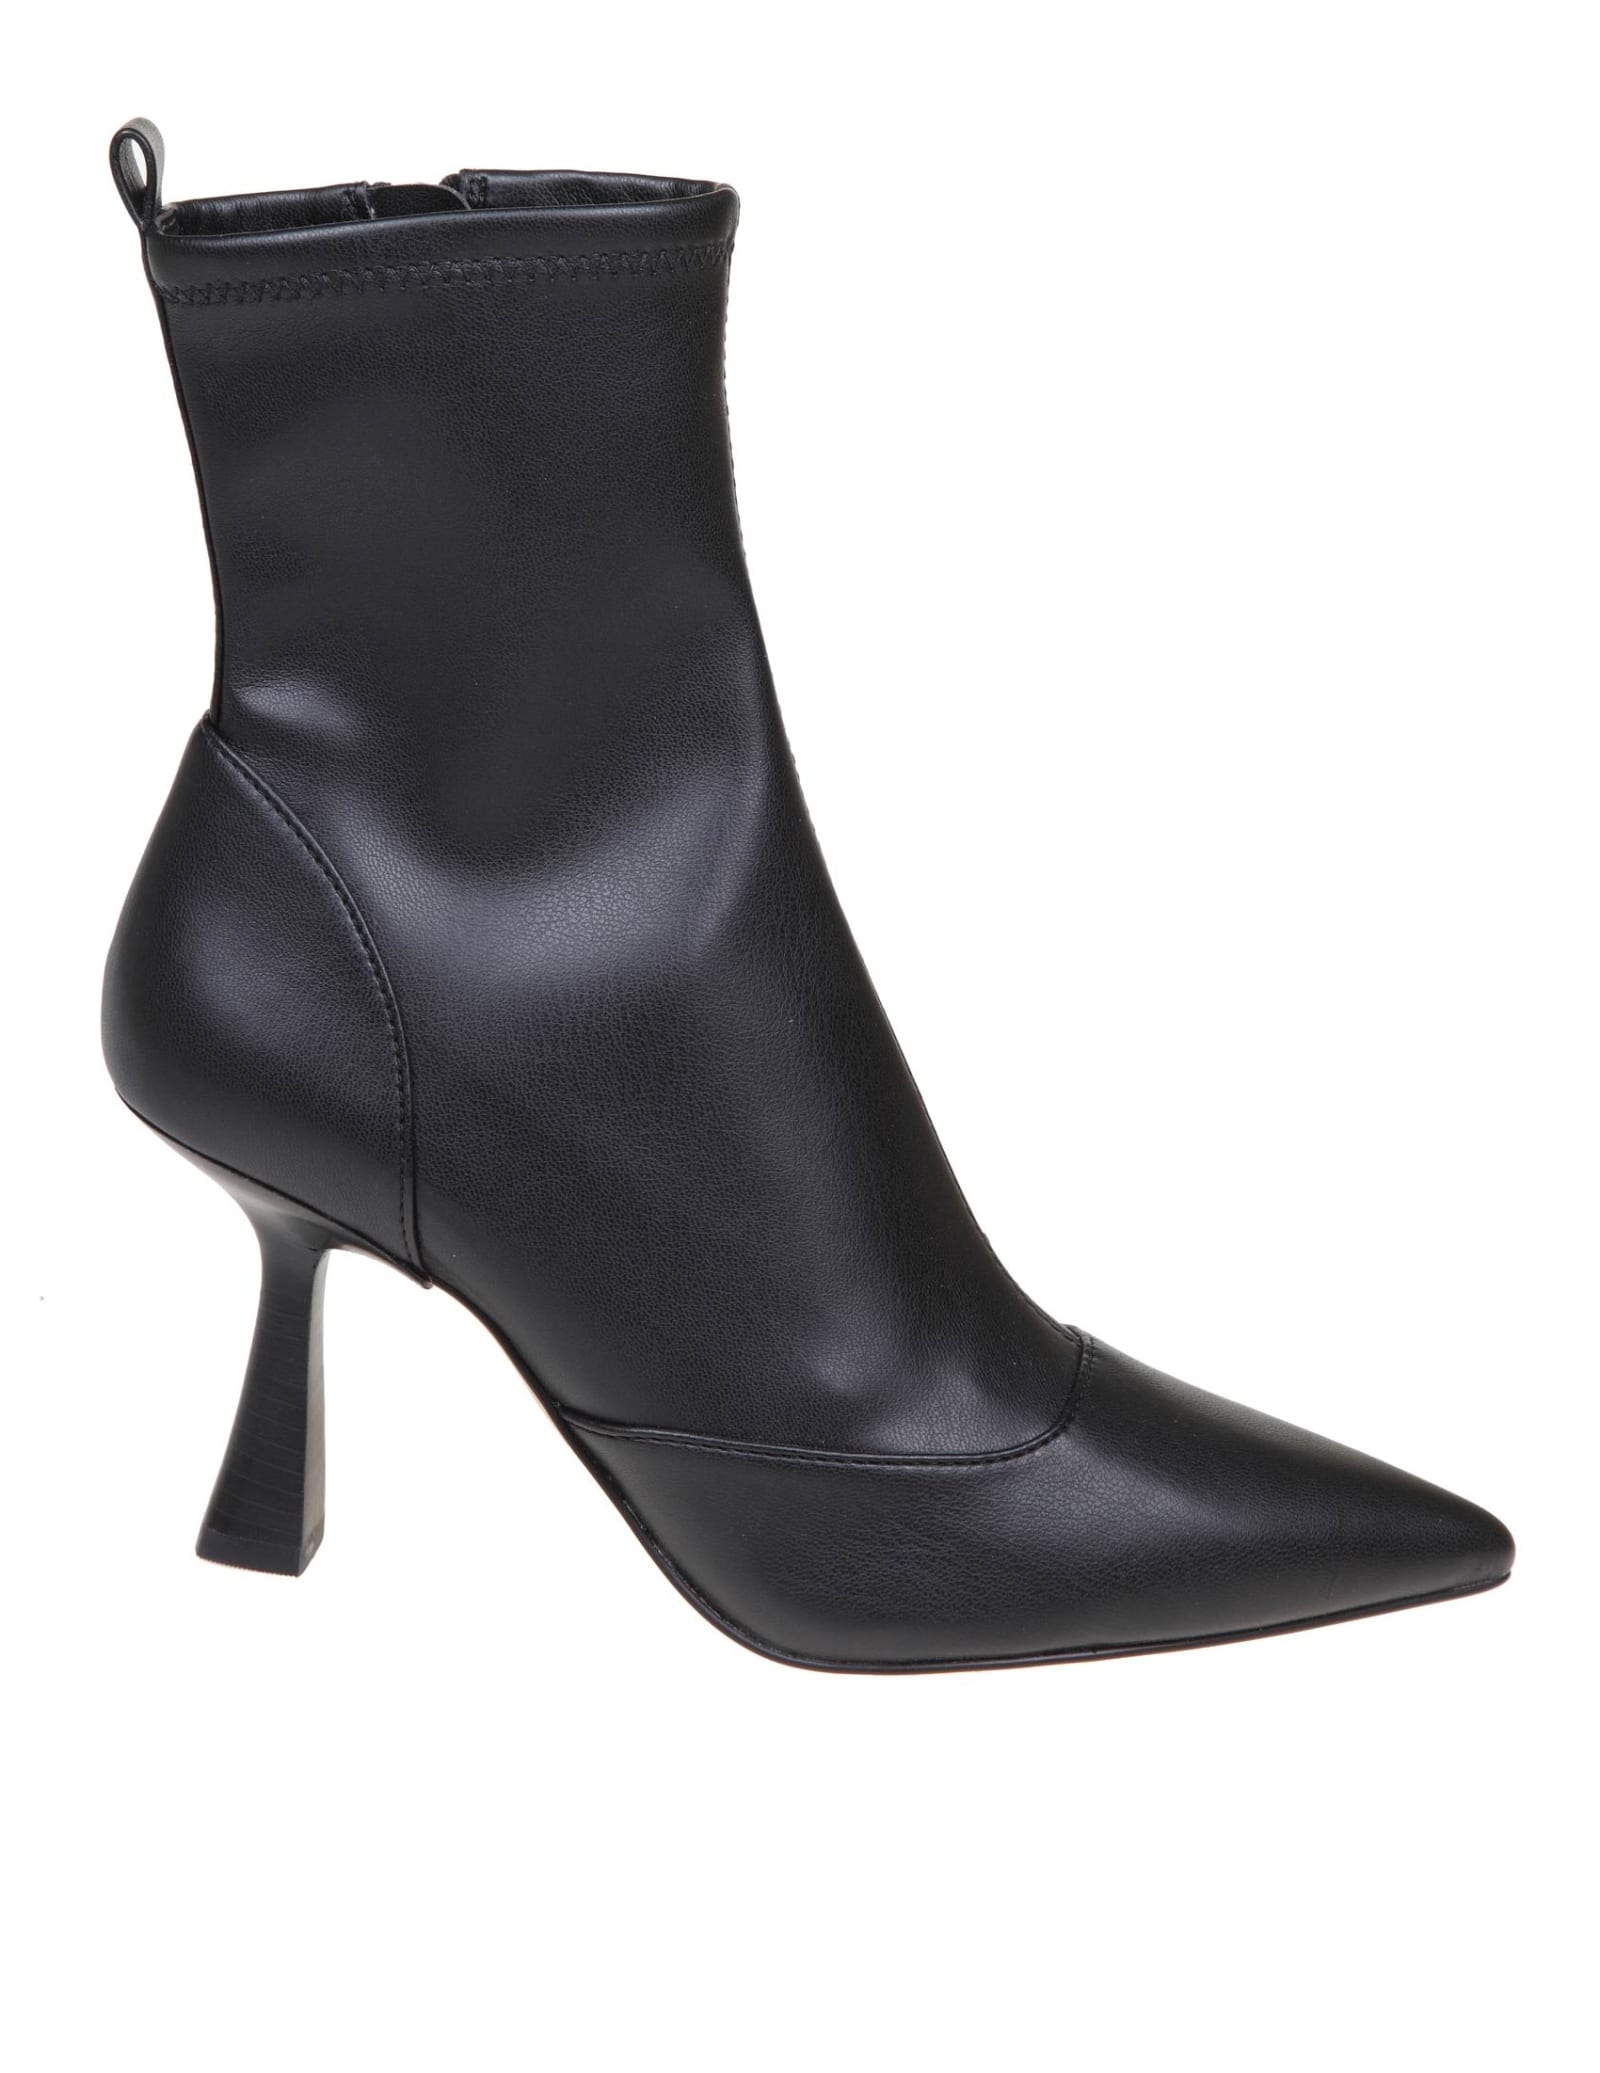 MICHAEL KORS CLARA ANKLE BOOTS IN BLACK NAPPA LEATHER